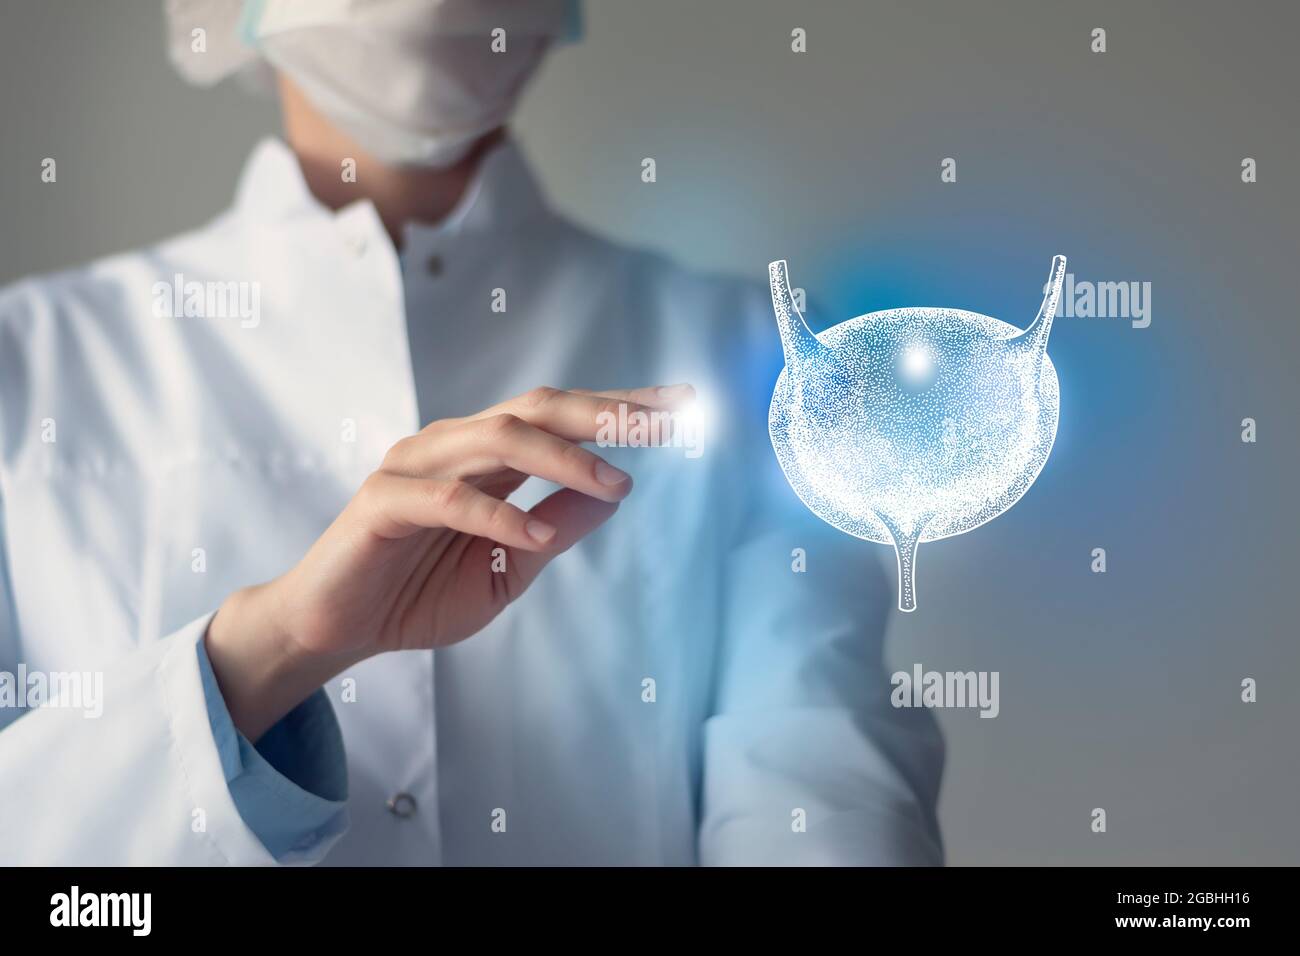 Female doctor touches virtual Bladder in hand. Blurred photo, handrawn human organ, highlighted blue as symbol of recovery. Healthcare hospital servic Stock Photo